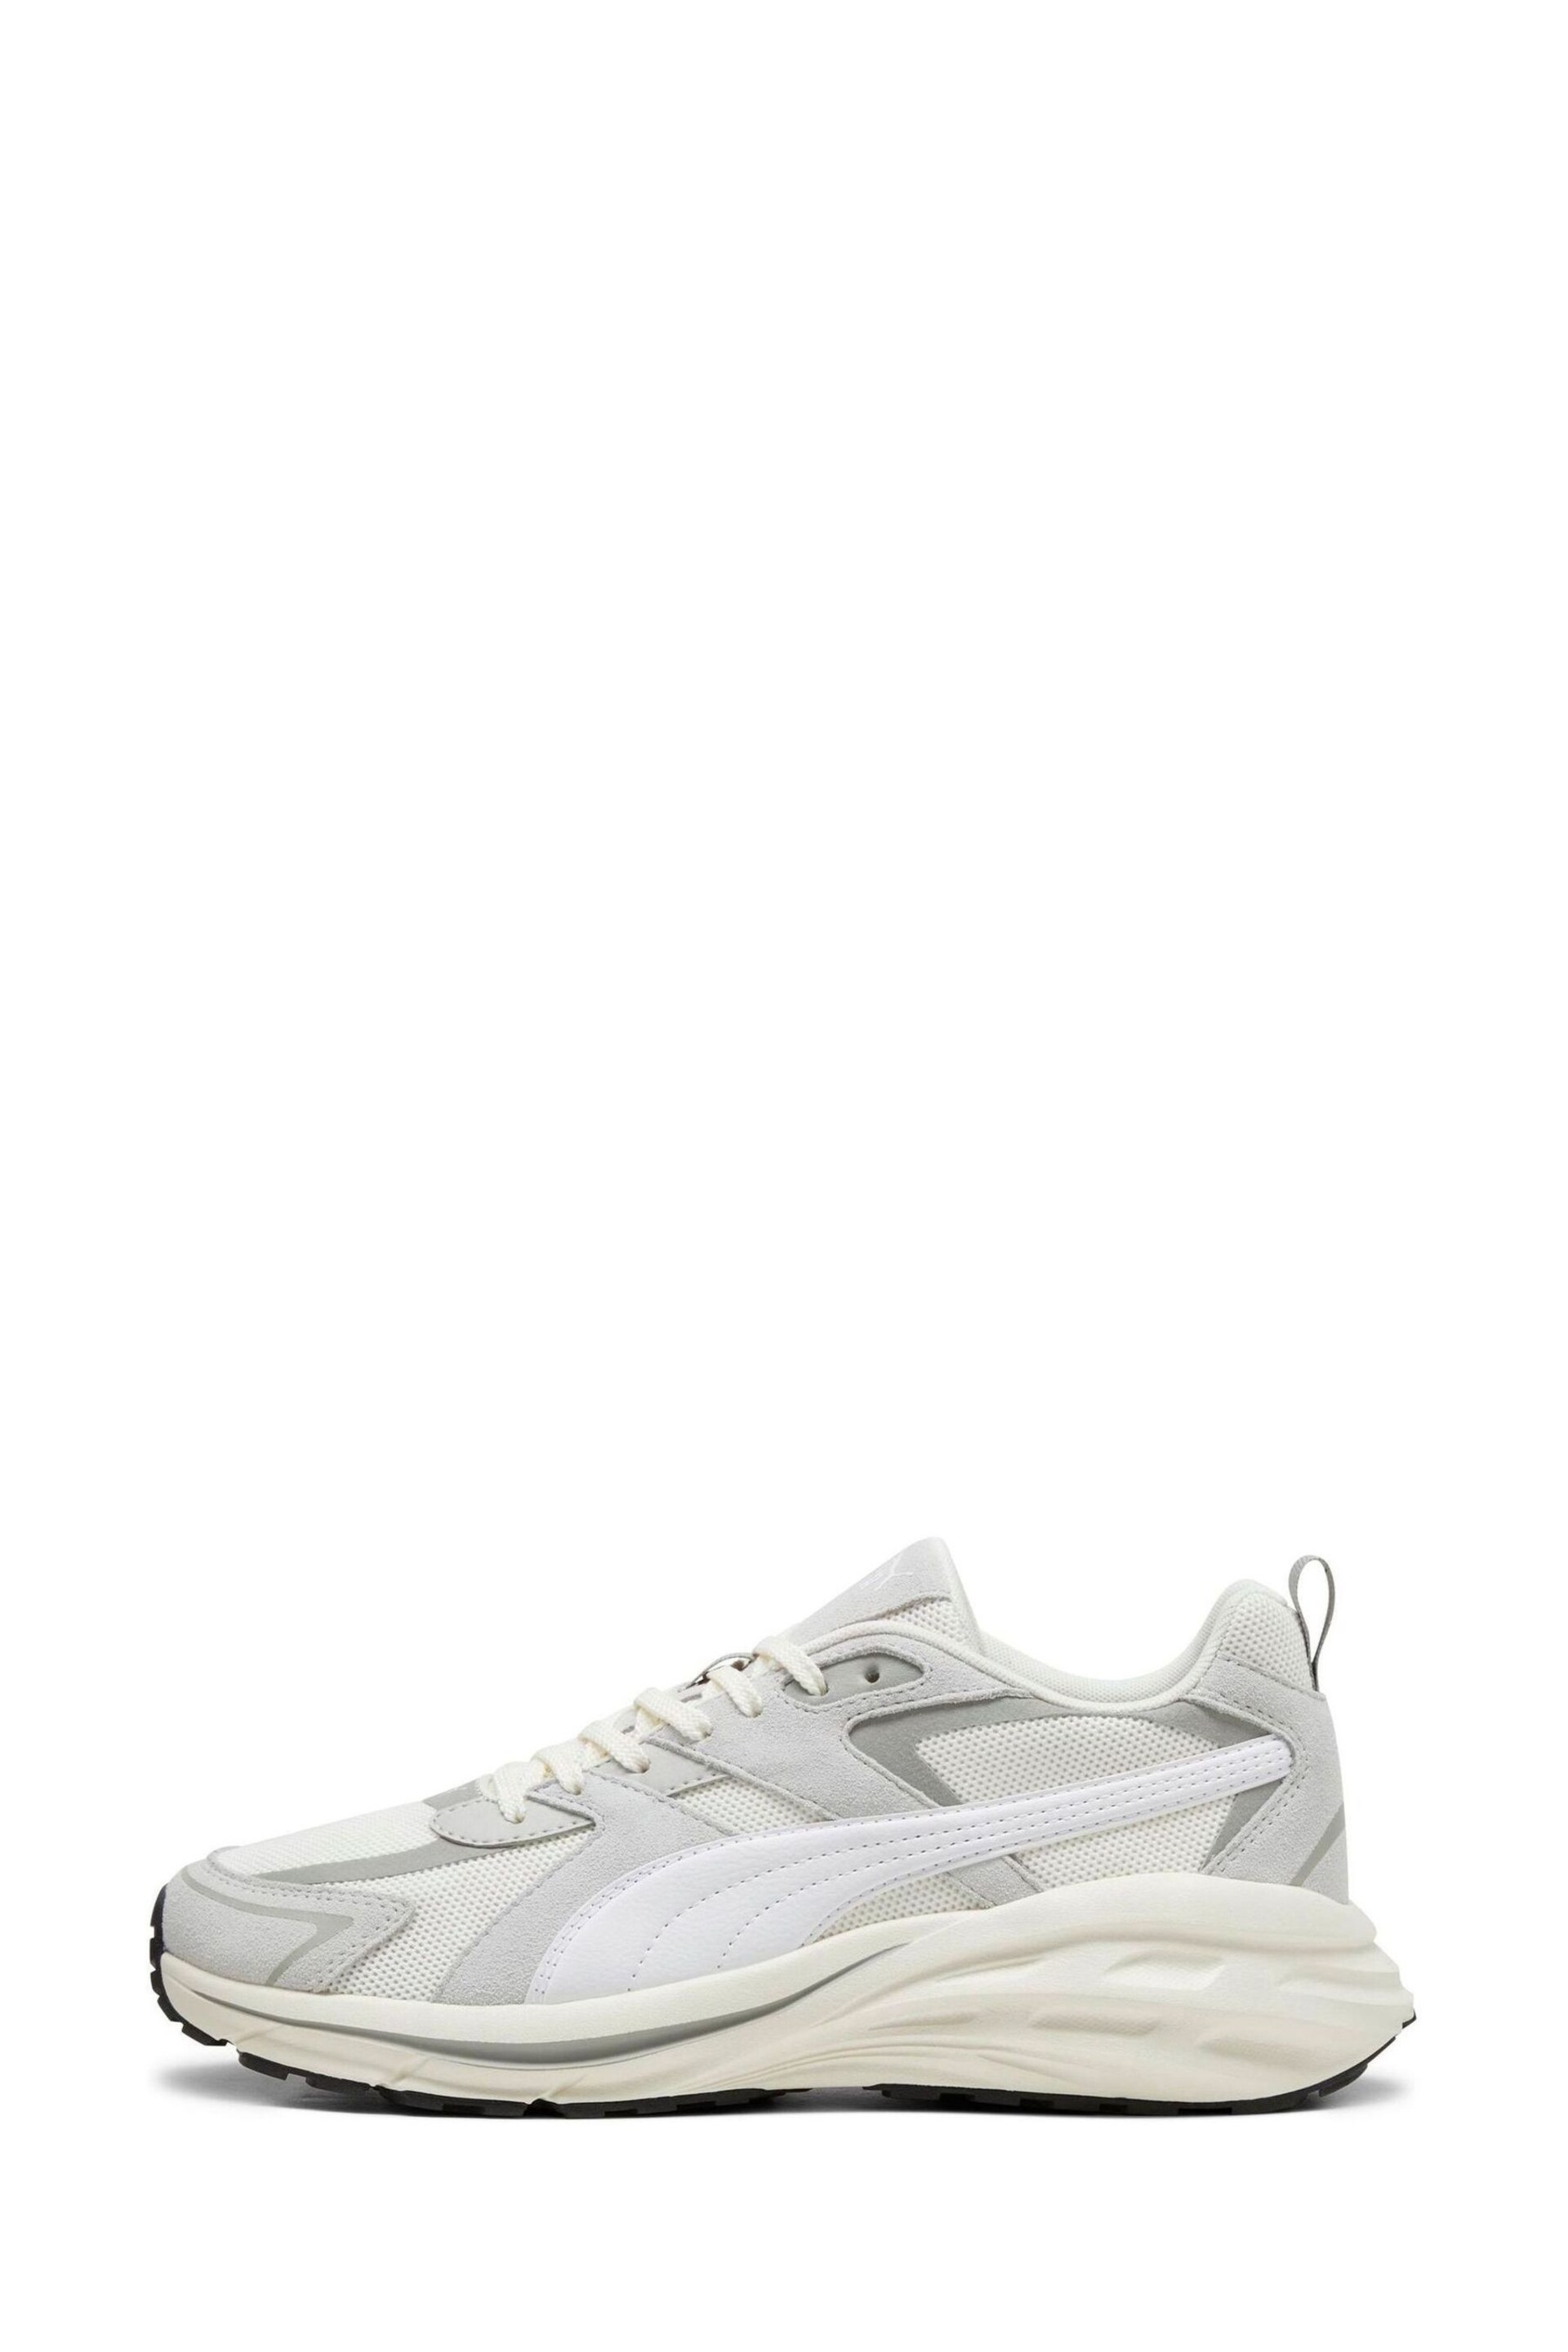 Puma White Mens Hypnotic LS Sneakers - Image 4 of 8